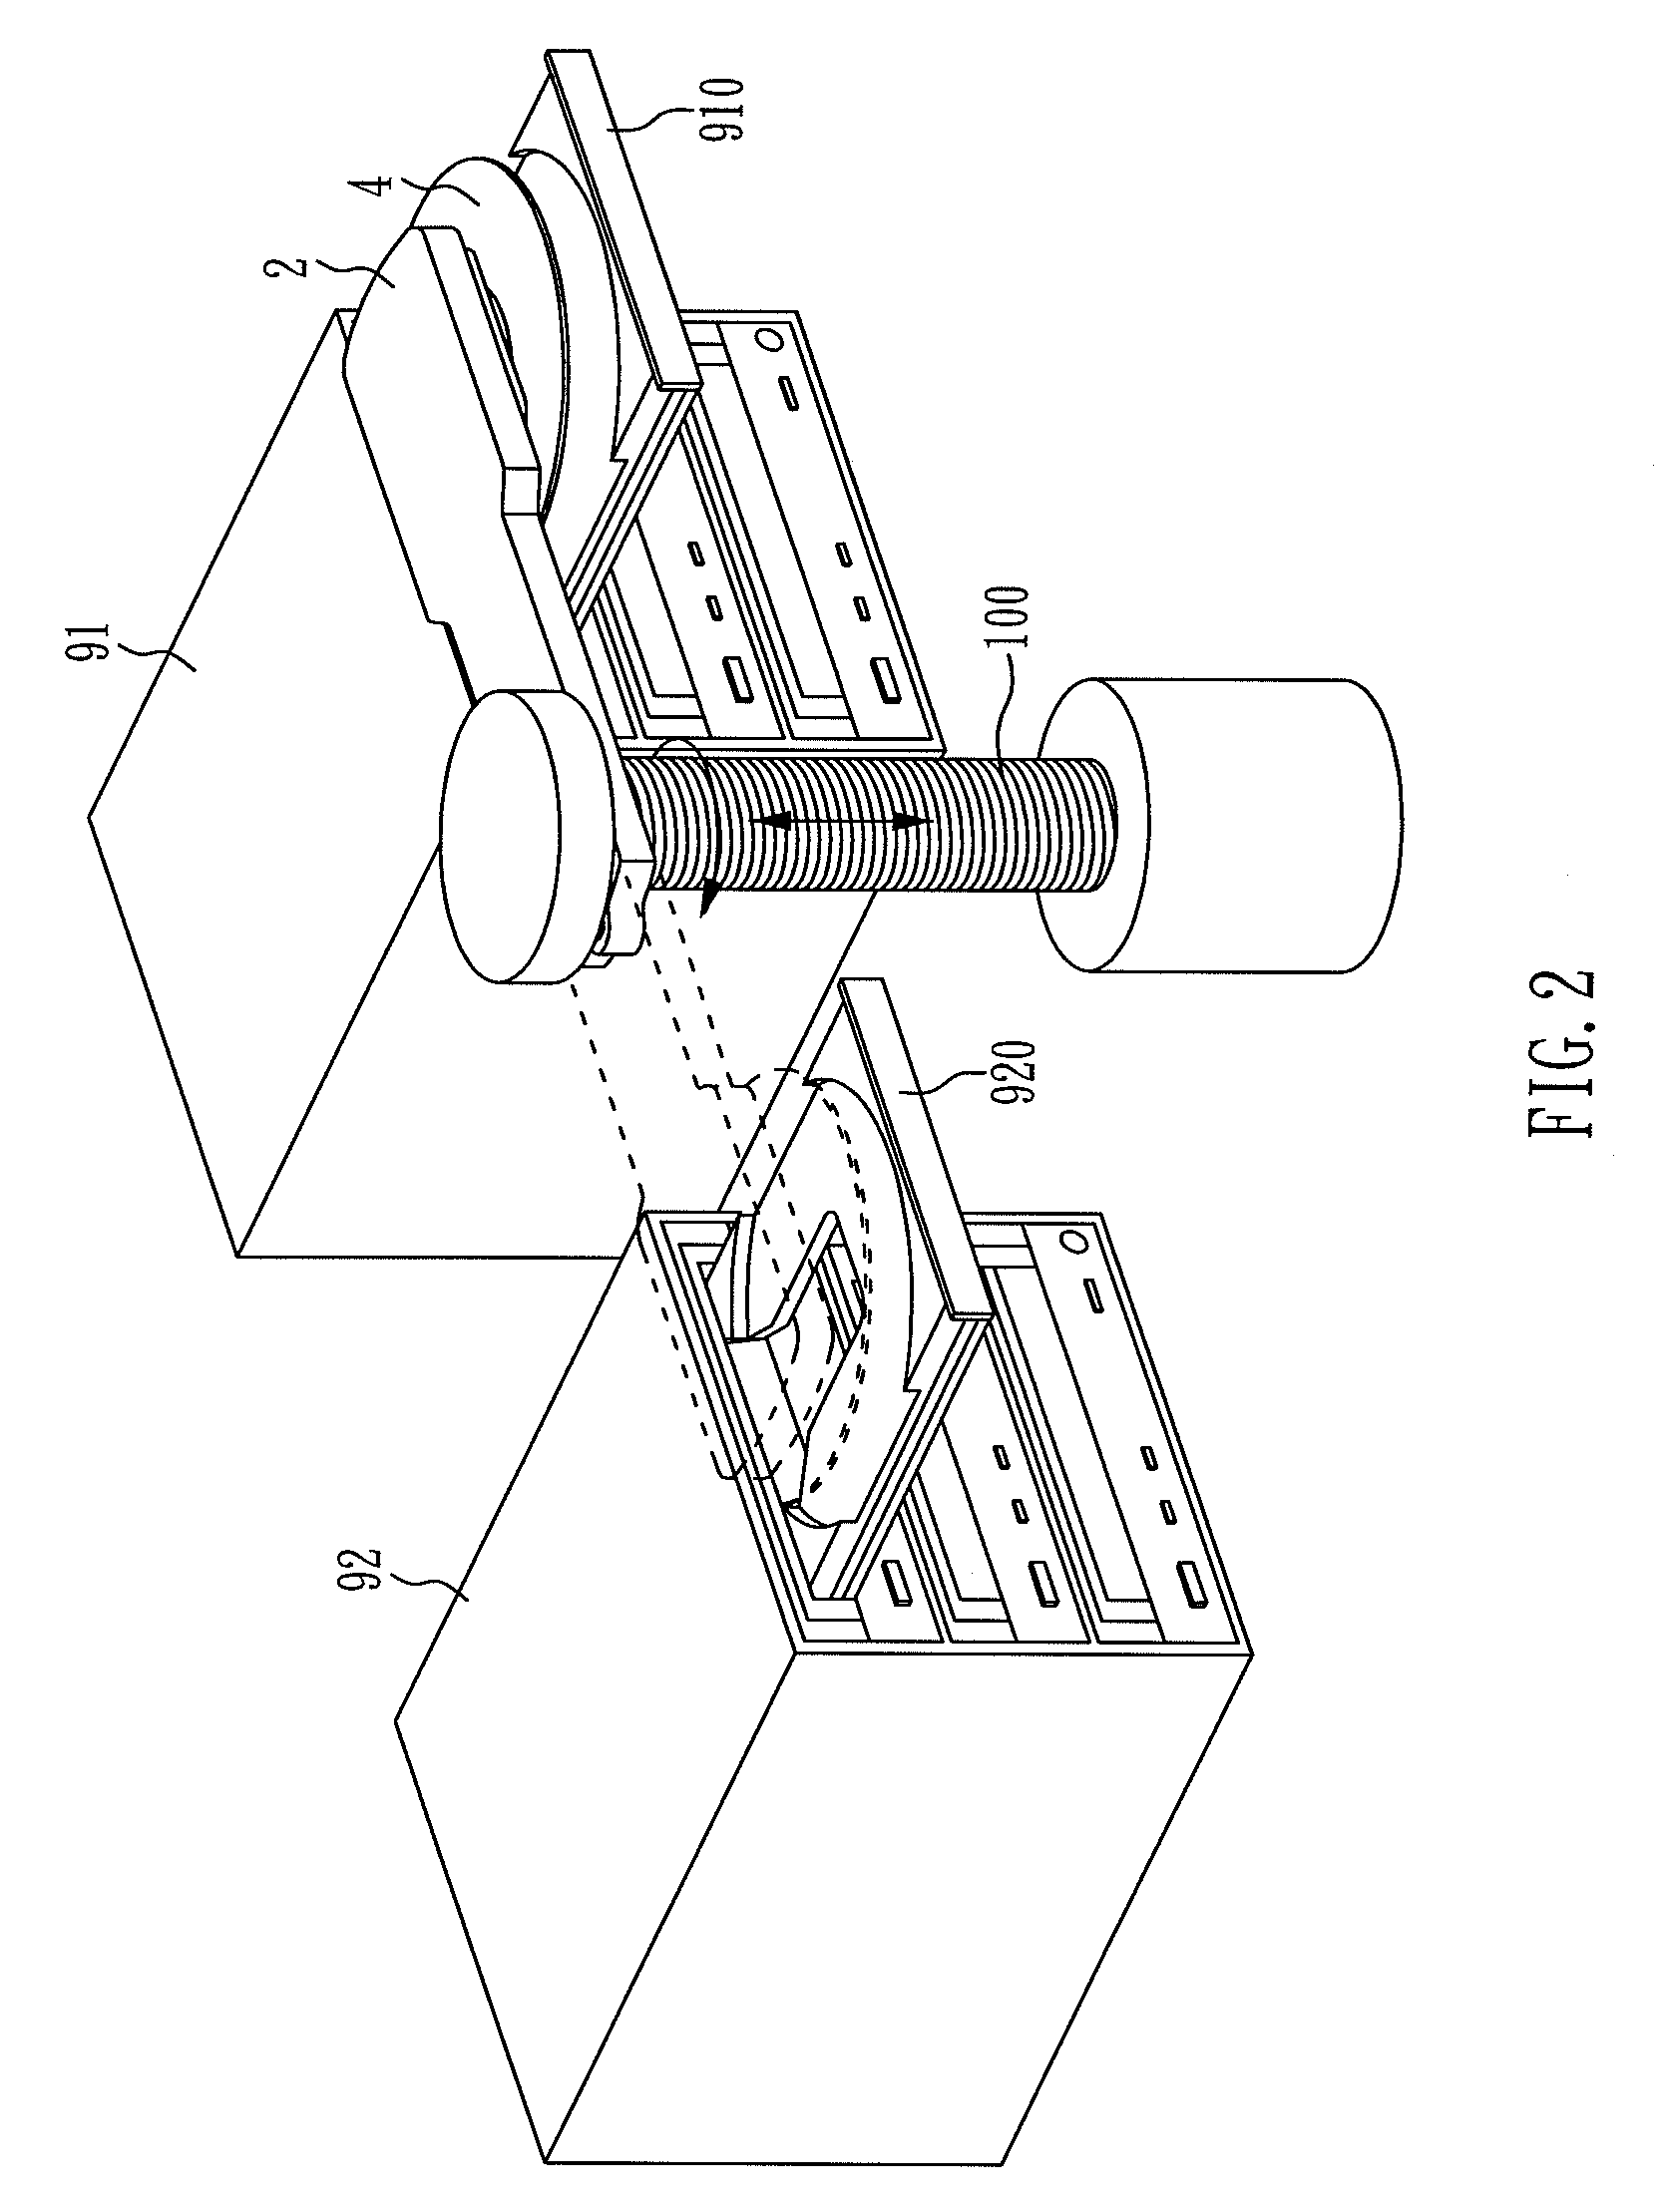 Transportation arm device for carrying discs